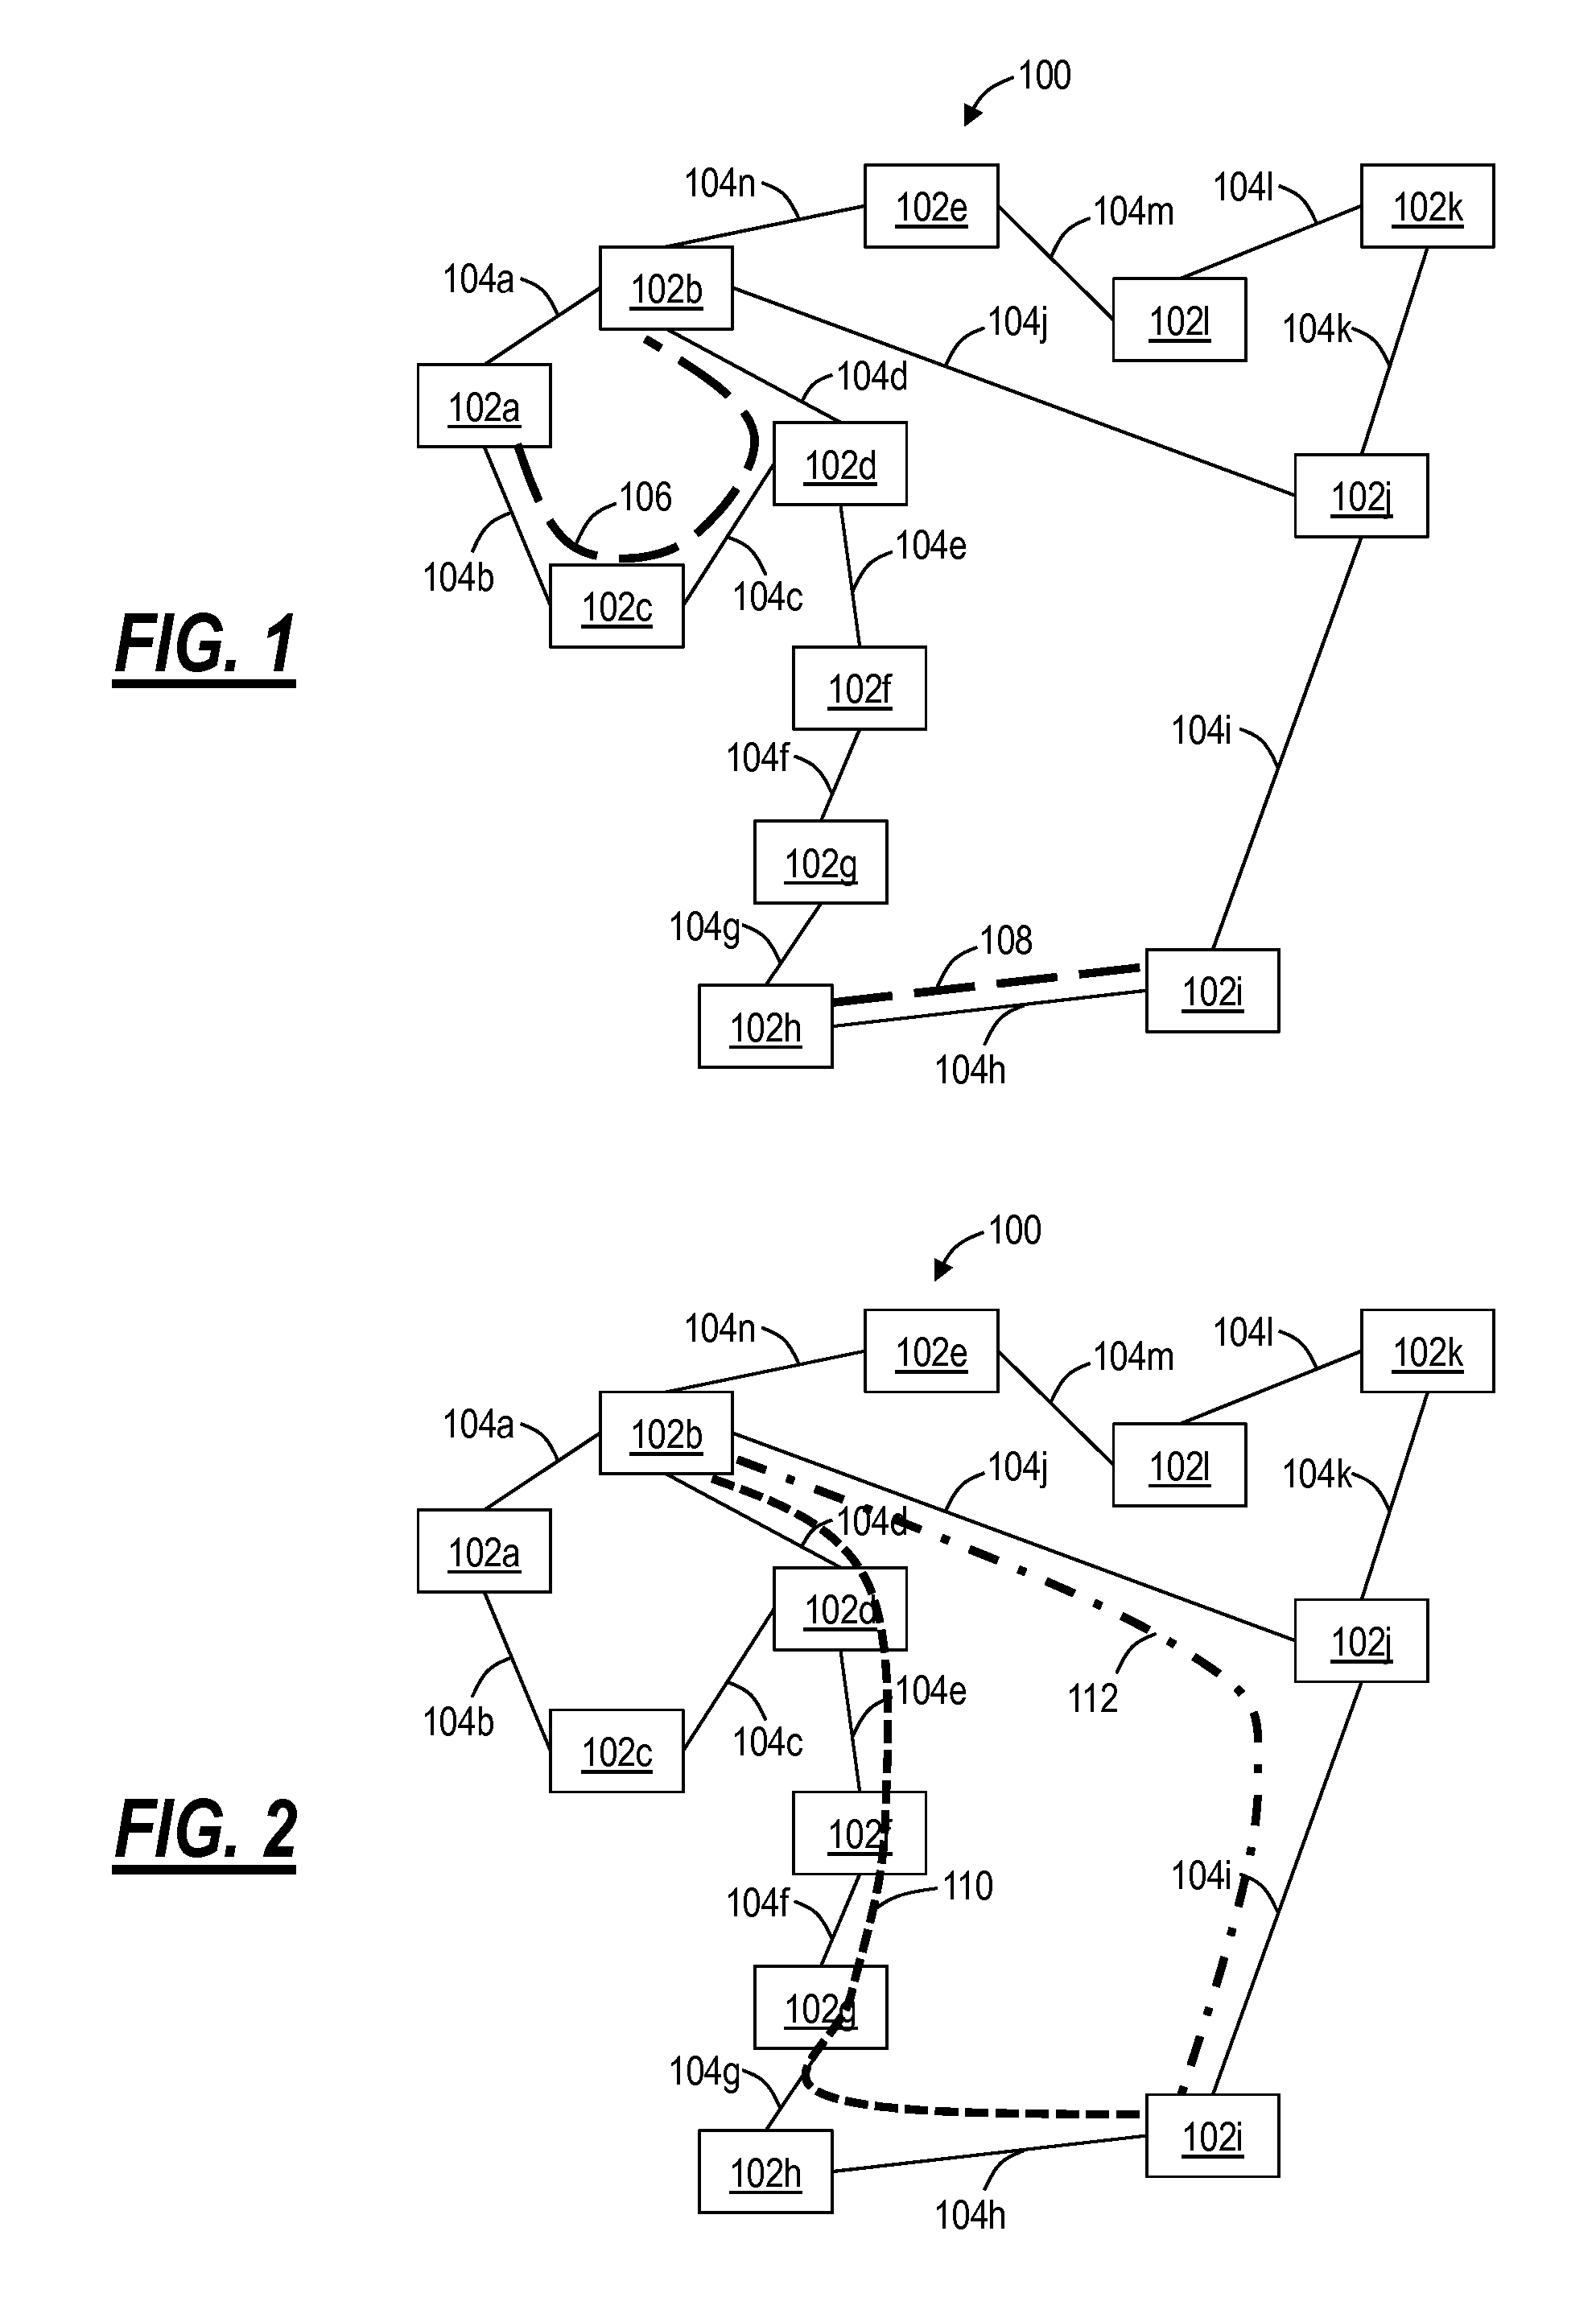 Drop port based shared risk link group systems and methods